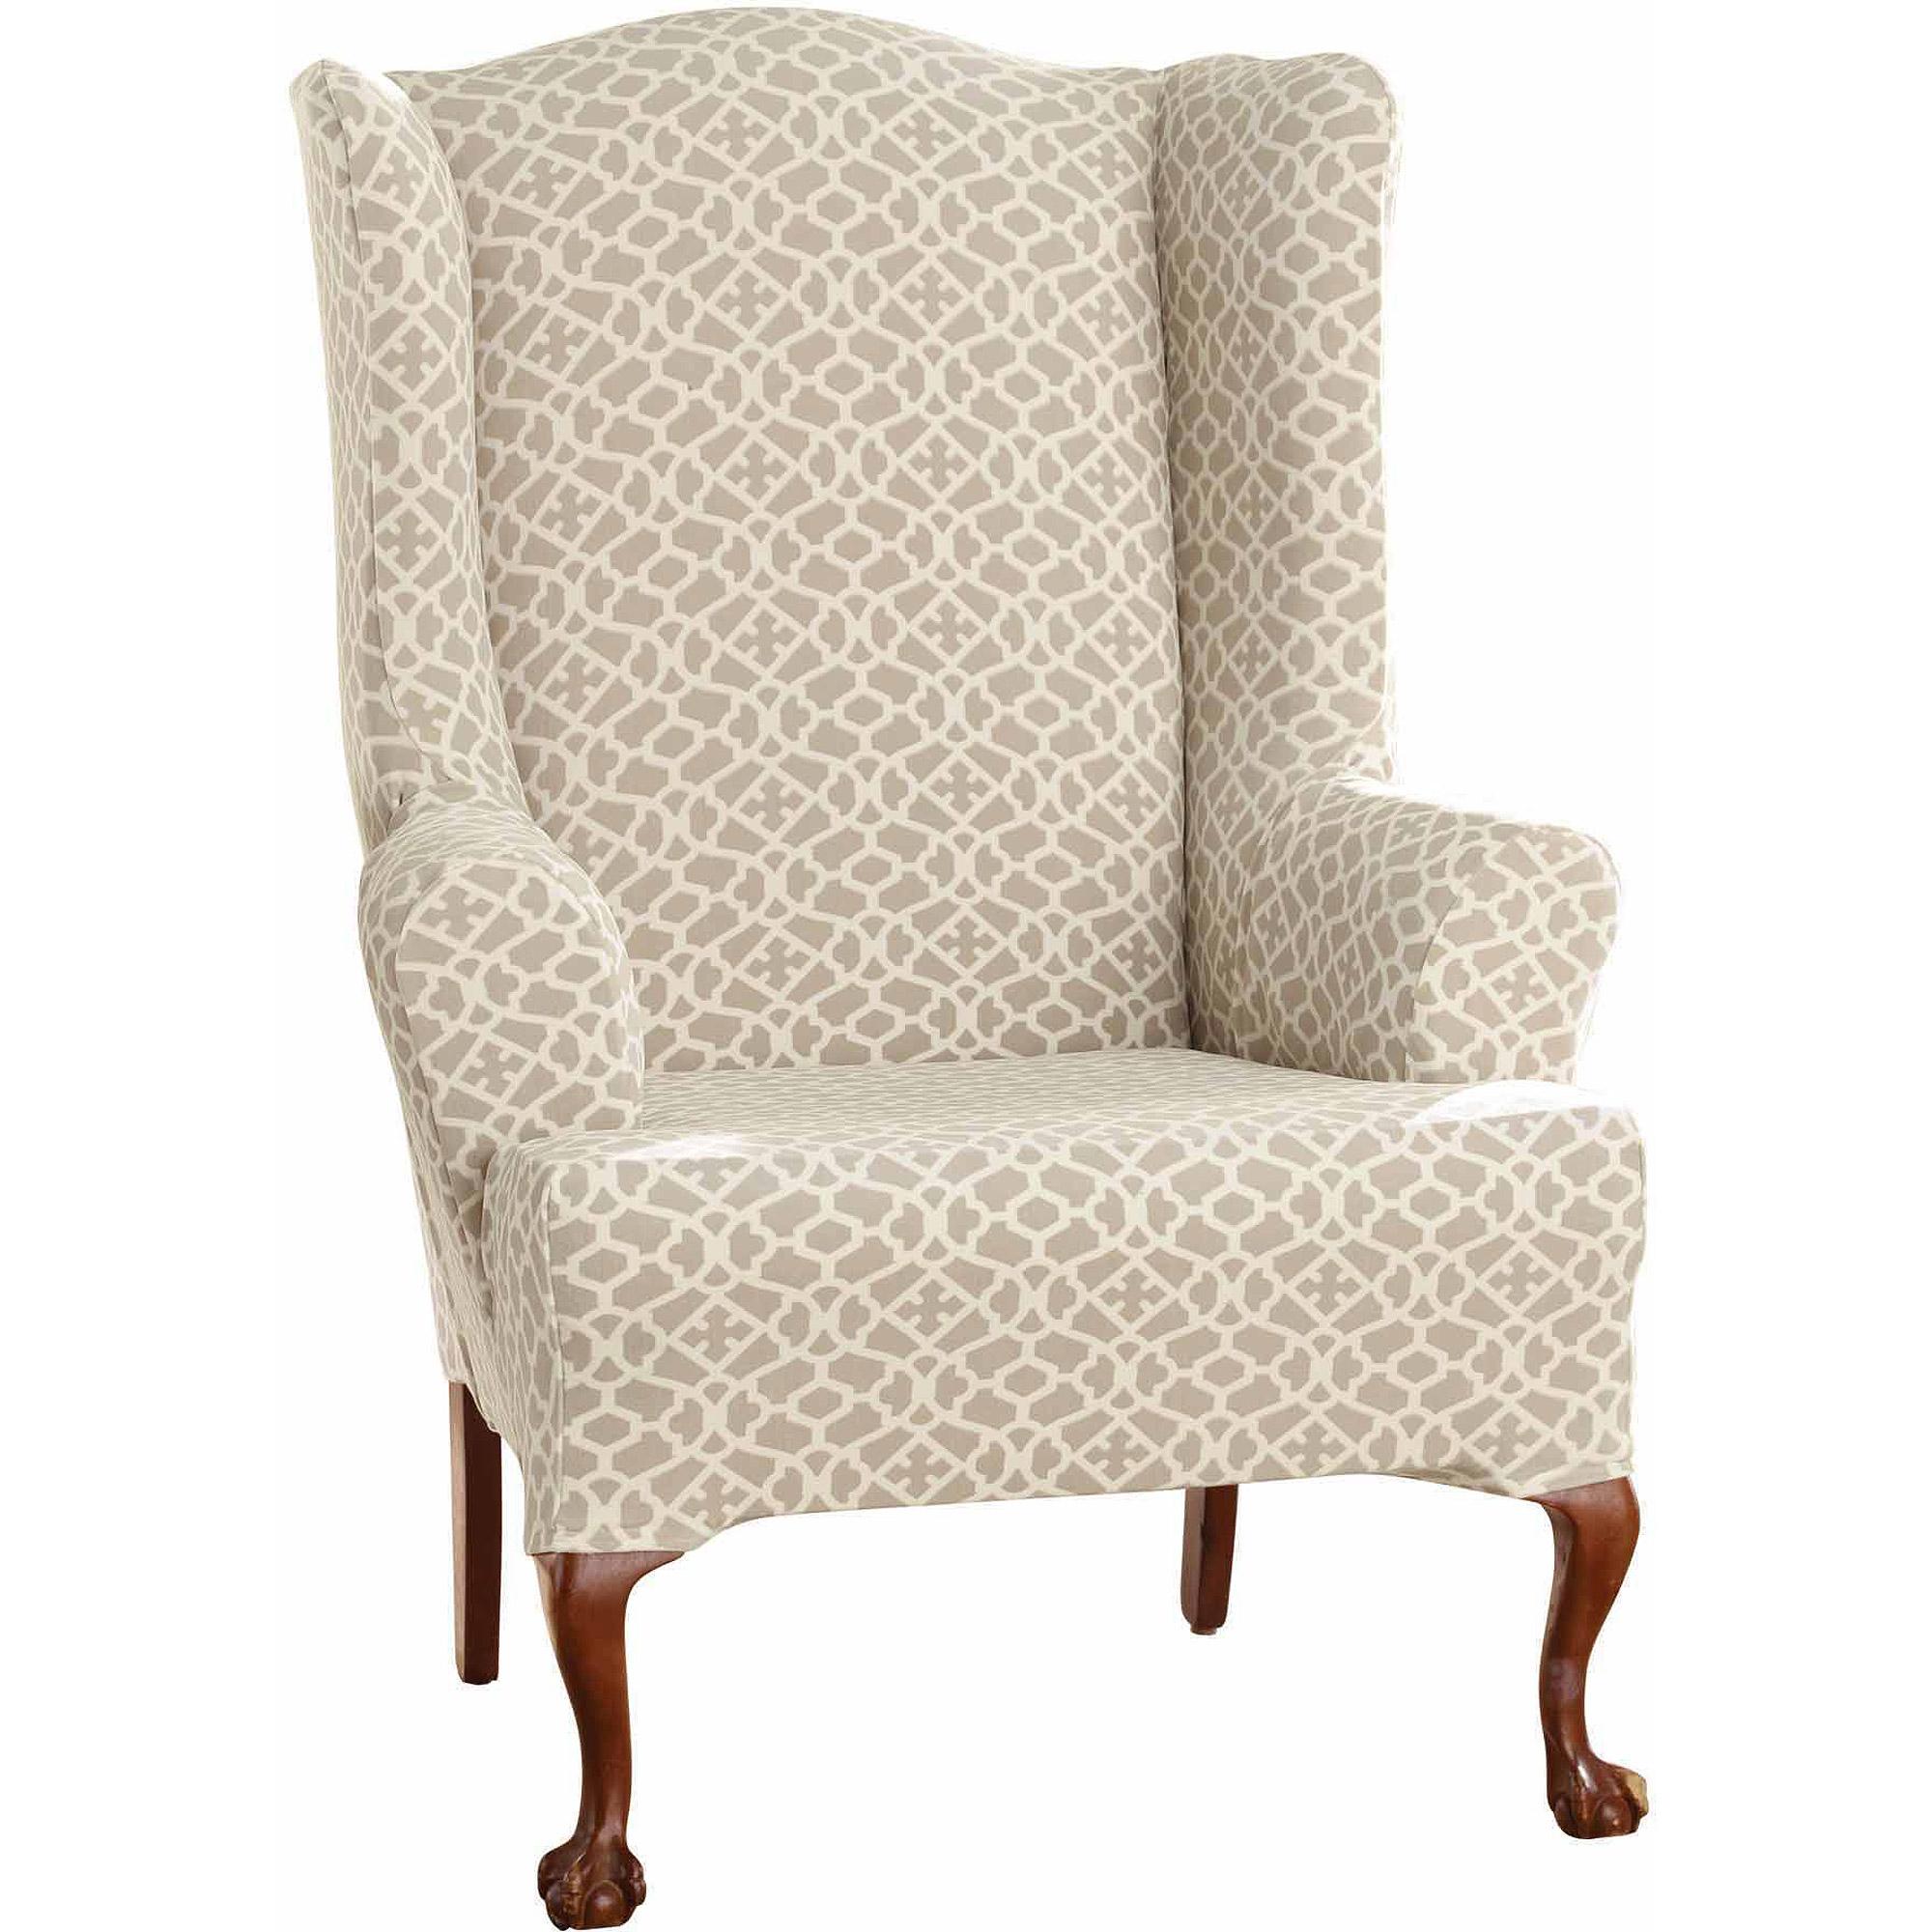 Chairs Stylish Patterned Wingback Chair Style Also Satisfying Living Room  Interior Wing Slipcover Upholstered Beige Pattern Armchair Sofa Couch  Covers